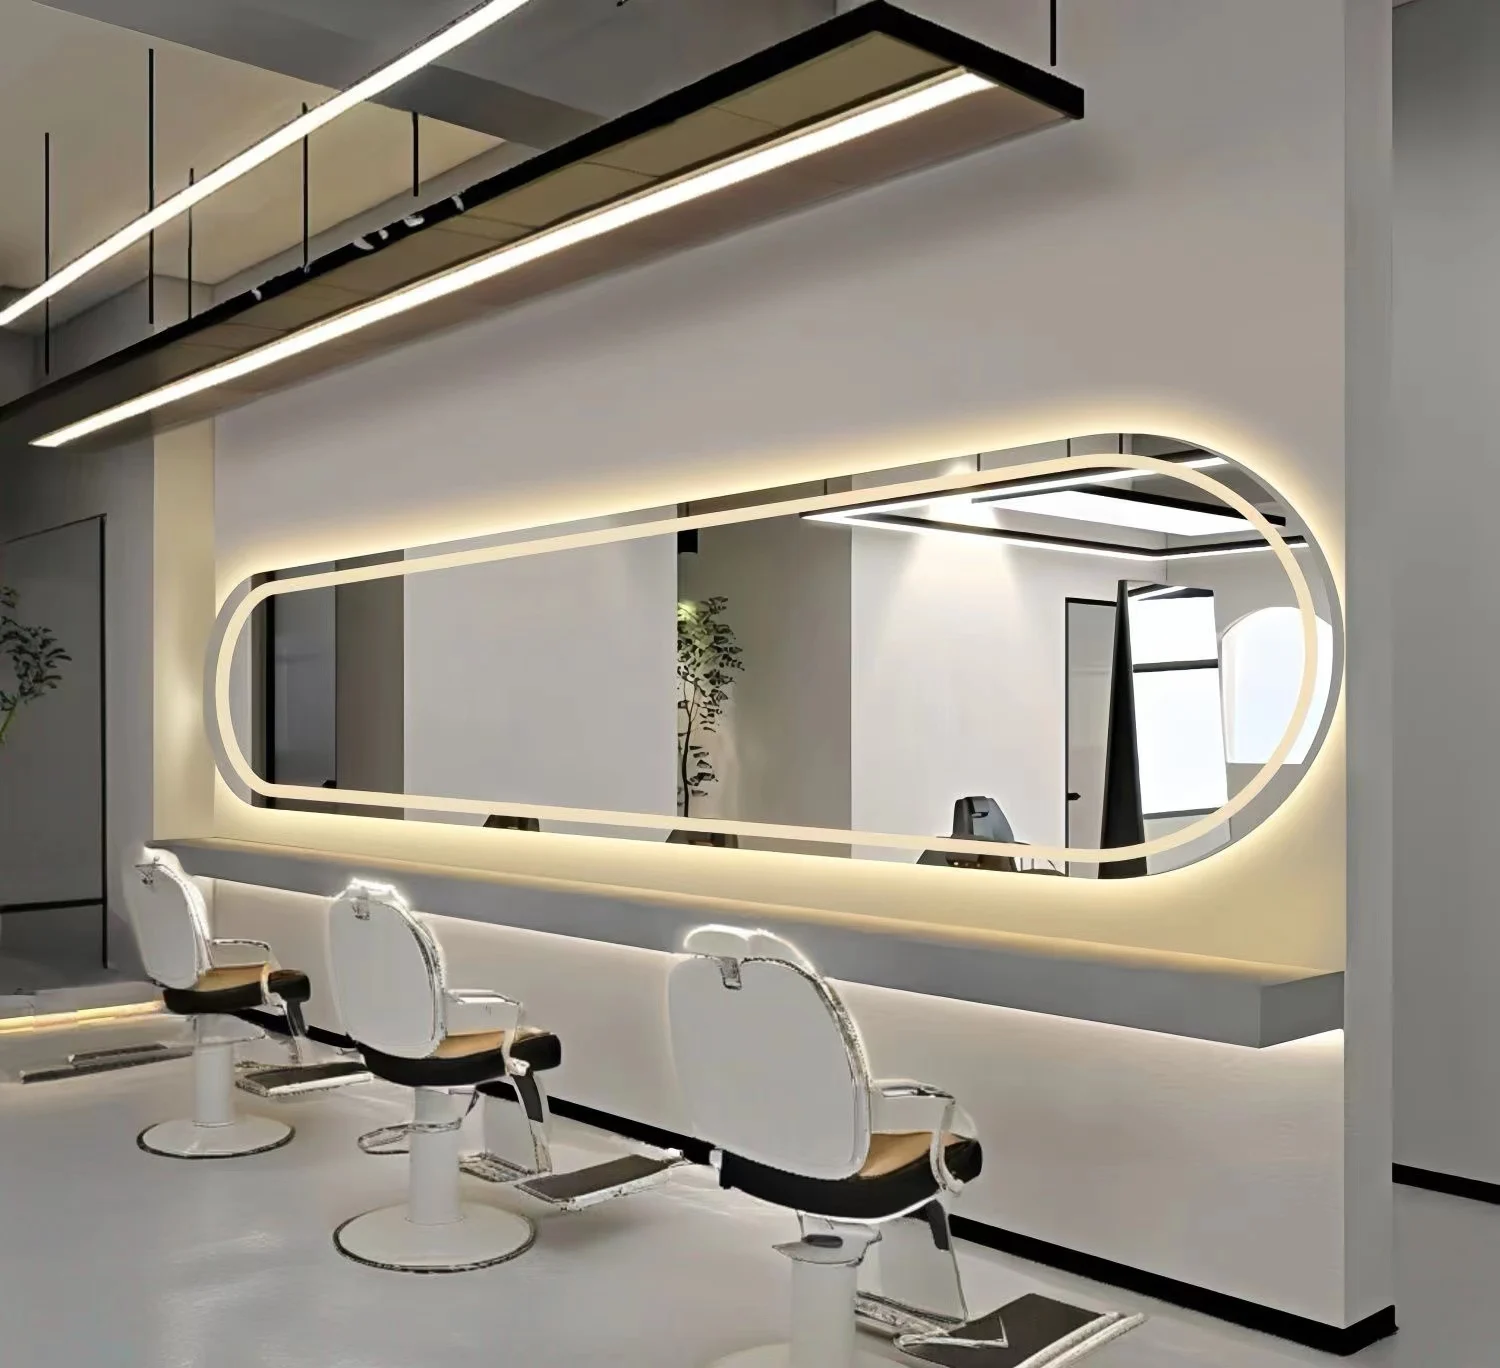 With LED lights high-end chase mirror barbershop cross hanging hair cutting dye ironing mirror hair salon special mirror table